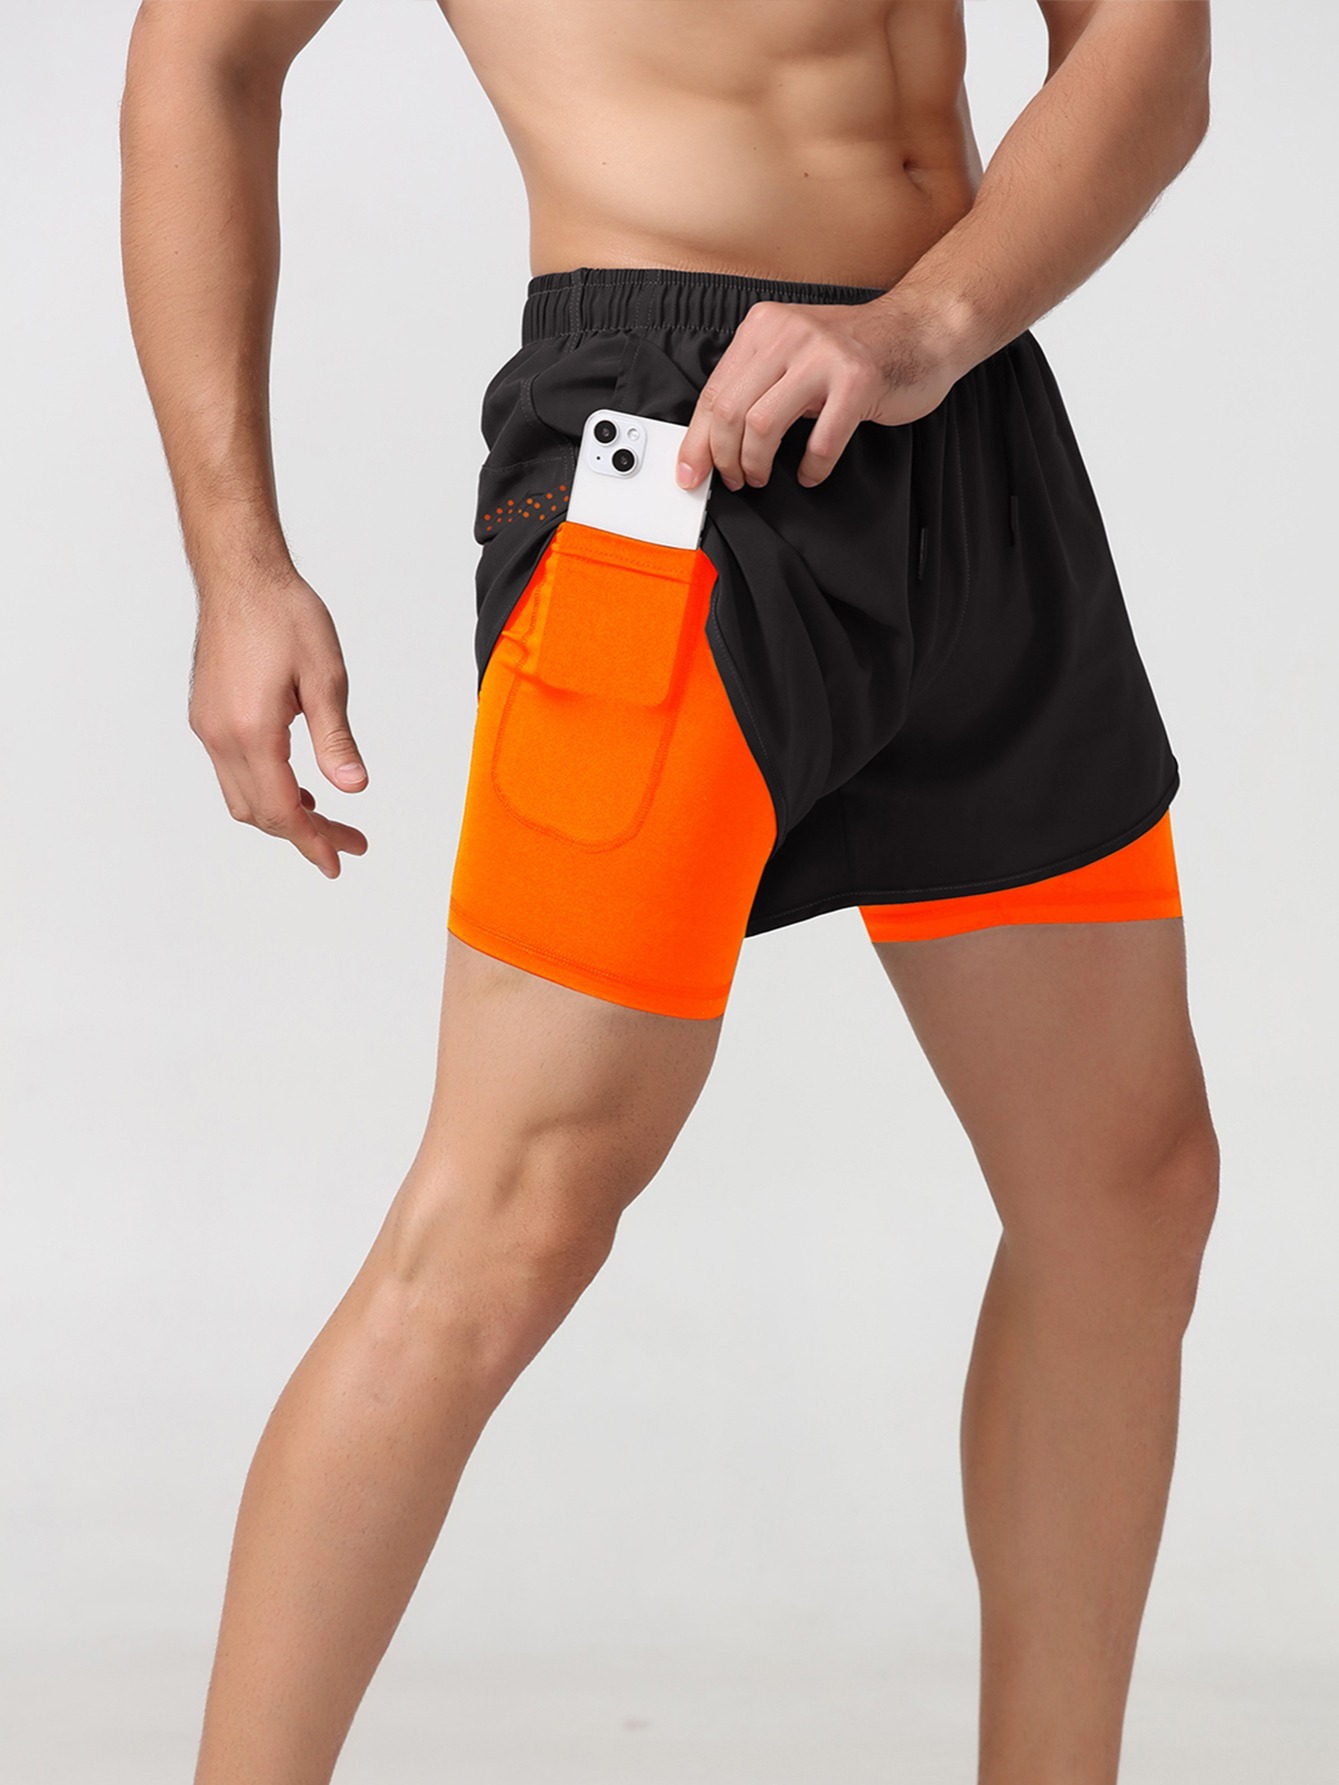 Men's 2 In 1 Running Shorts Quick Dry Athletic Shorts With Liner Leggings,  Lightweight Workout Training Shorts